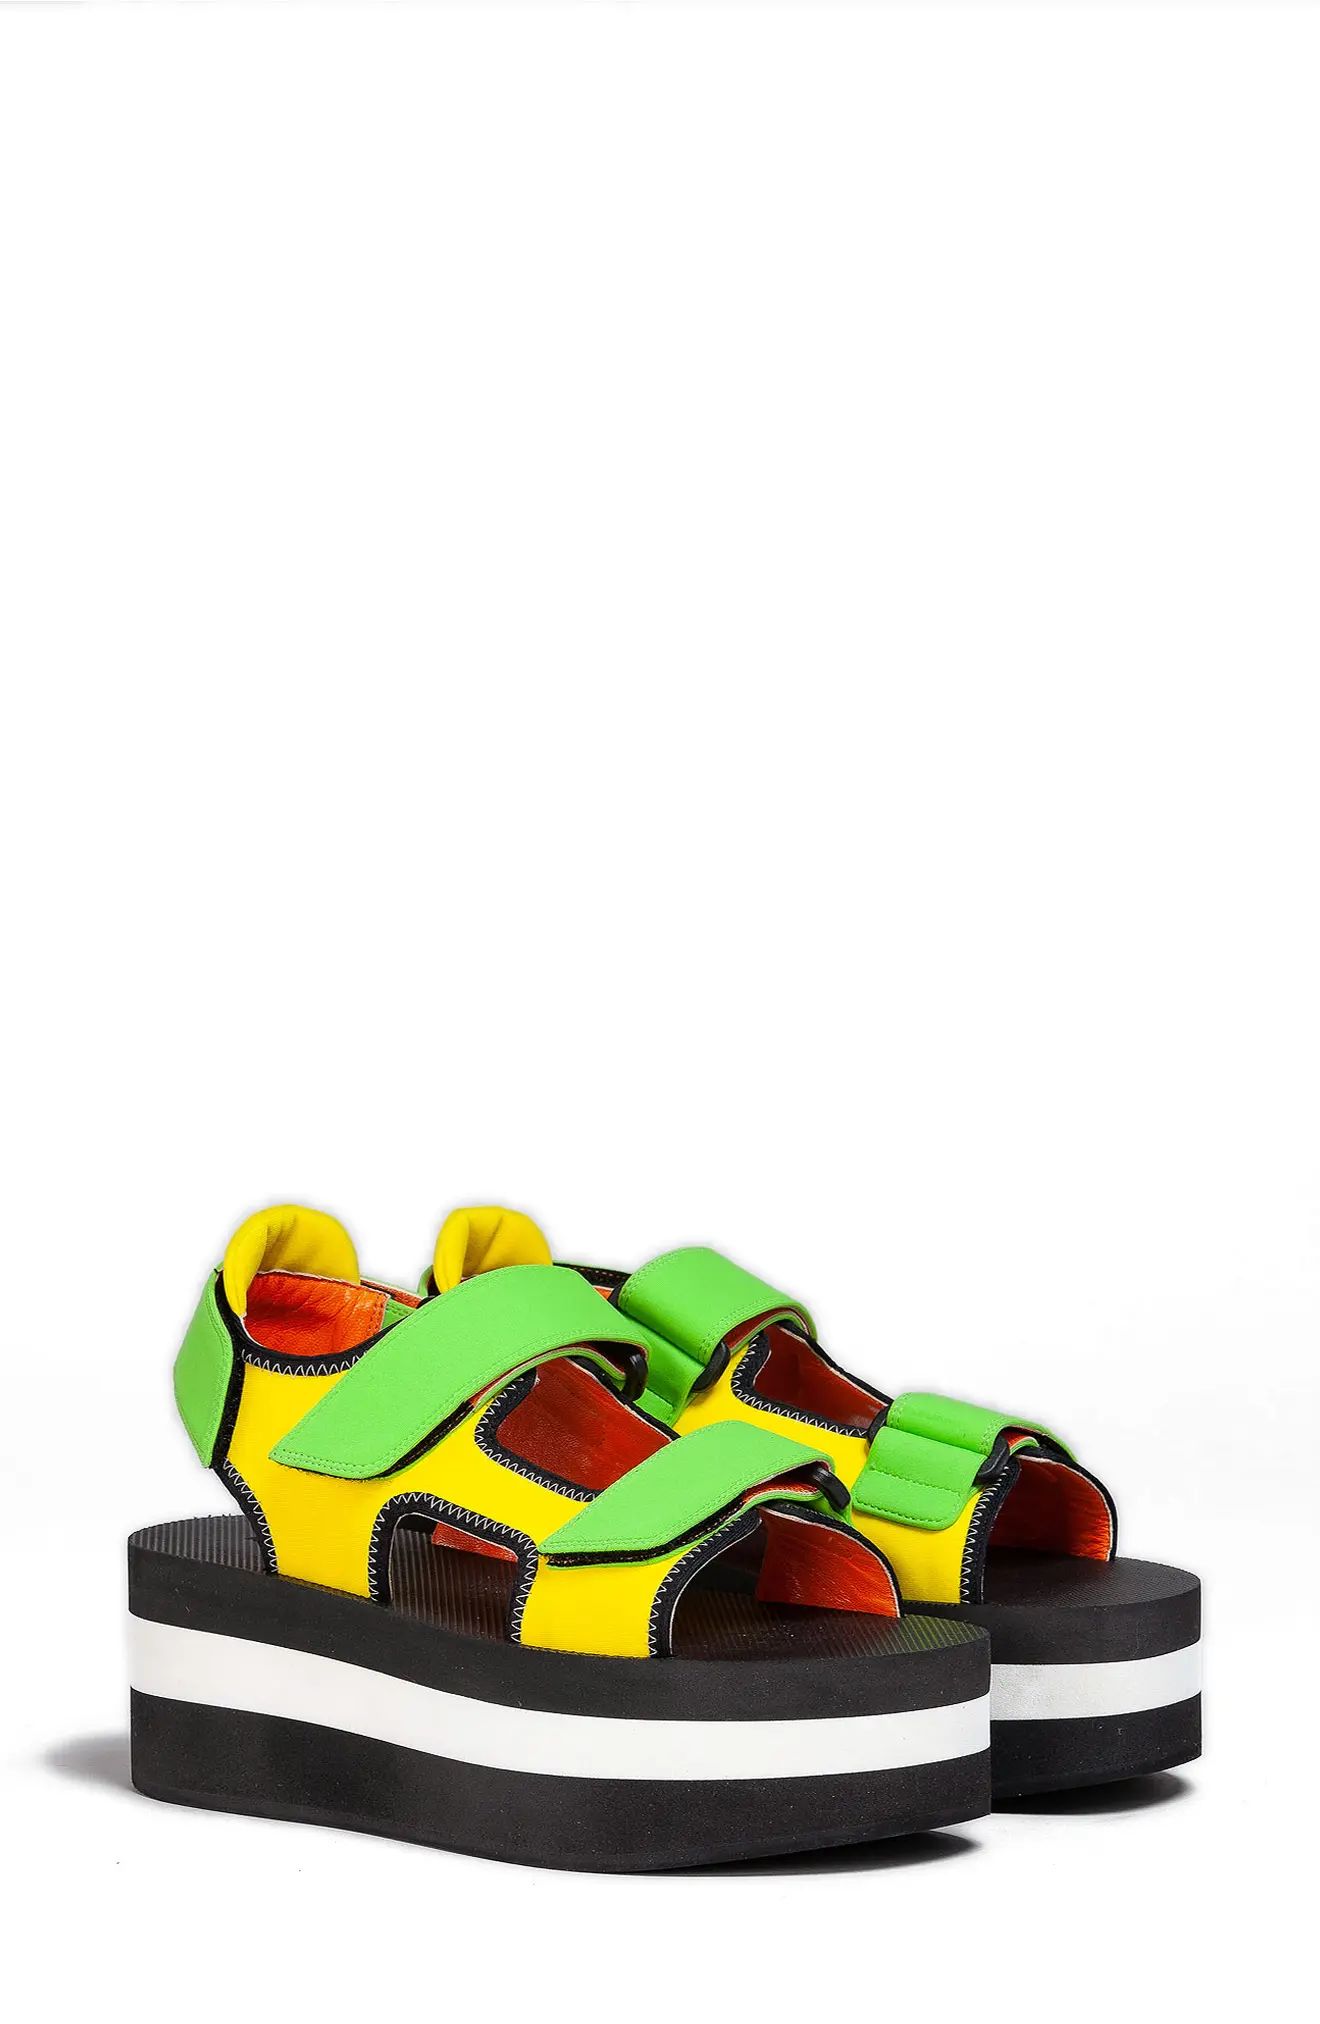 Marni Colorblock Wedge Sandal in Corn/lime at Nordstrom, Size 6Us | Nordstrom